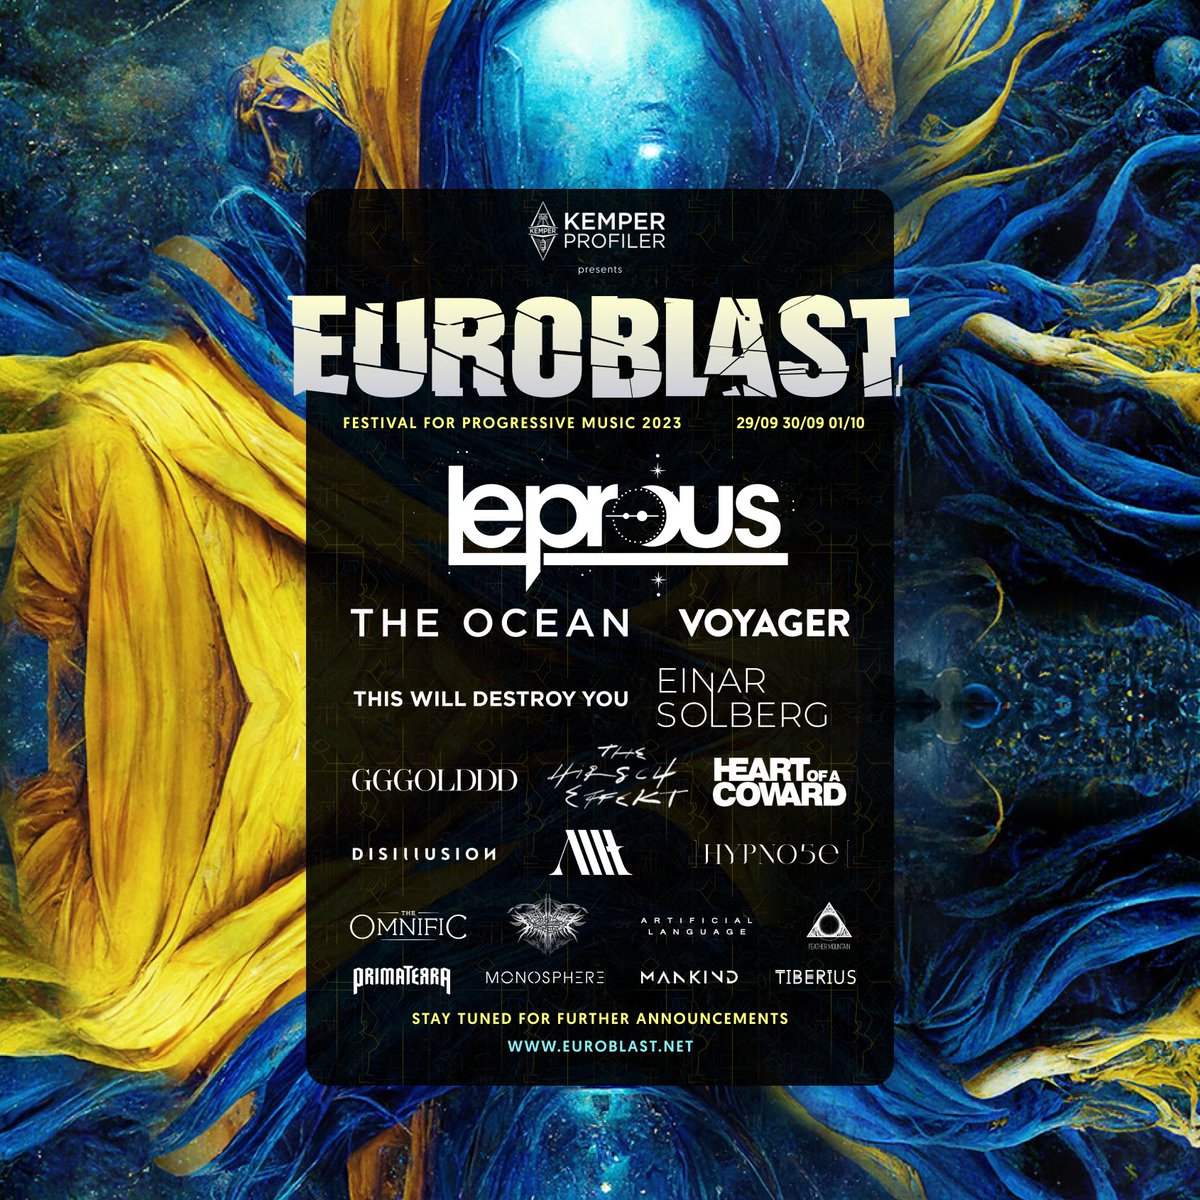 The @Artificiallband boys are heading to Germany this year! See ya'll at @Euroblast_Fest!! Tickets: tickets.euroblast.net

#EuroblastFestival2023 #Euroblast #rad #radmusic